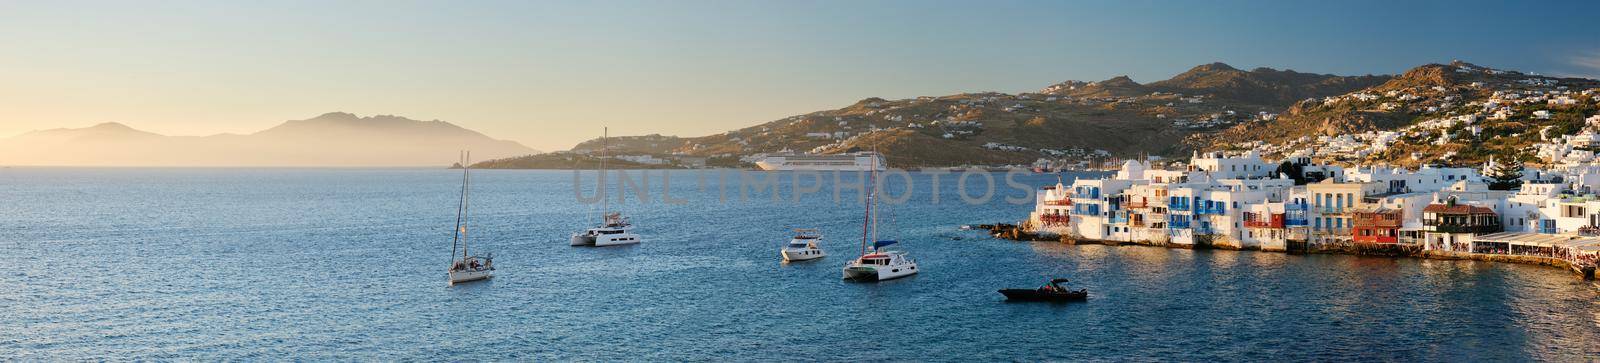 Sunset in Mykonos, Greece, with cruise ship and yachts in the harbor by dimol